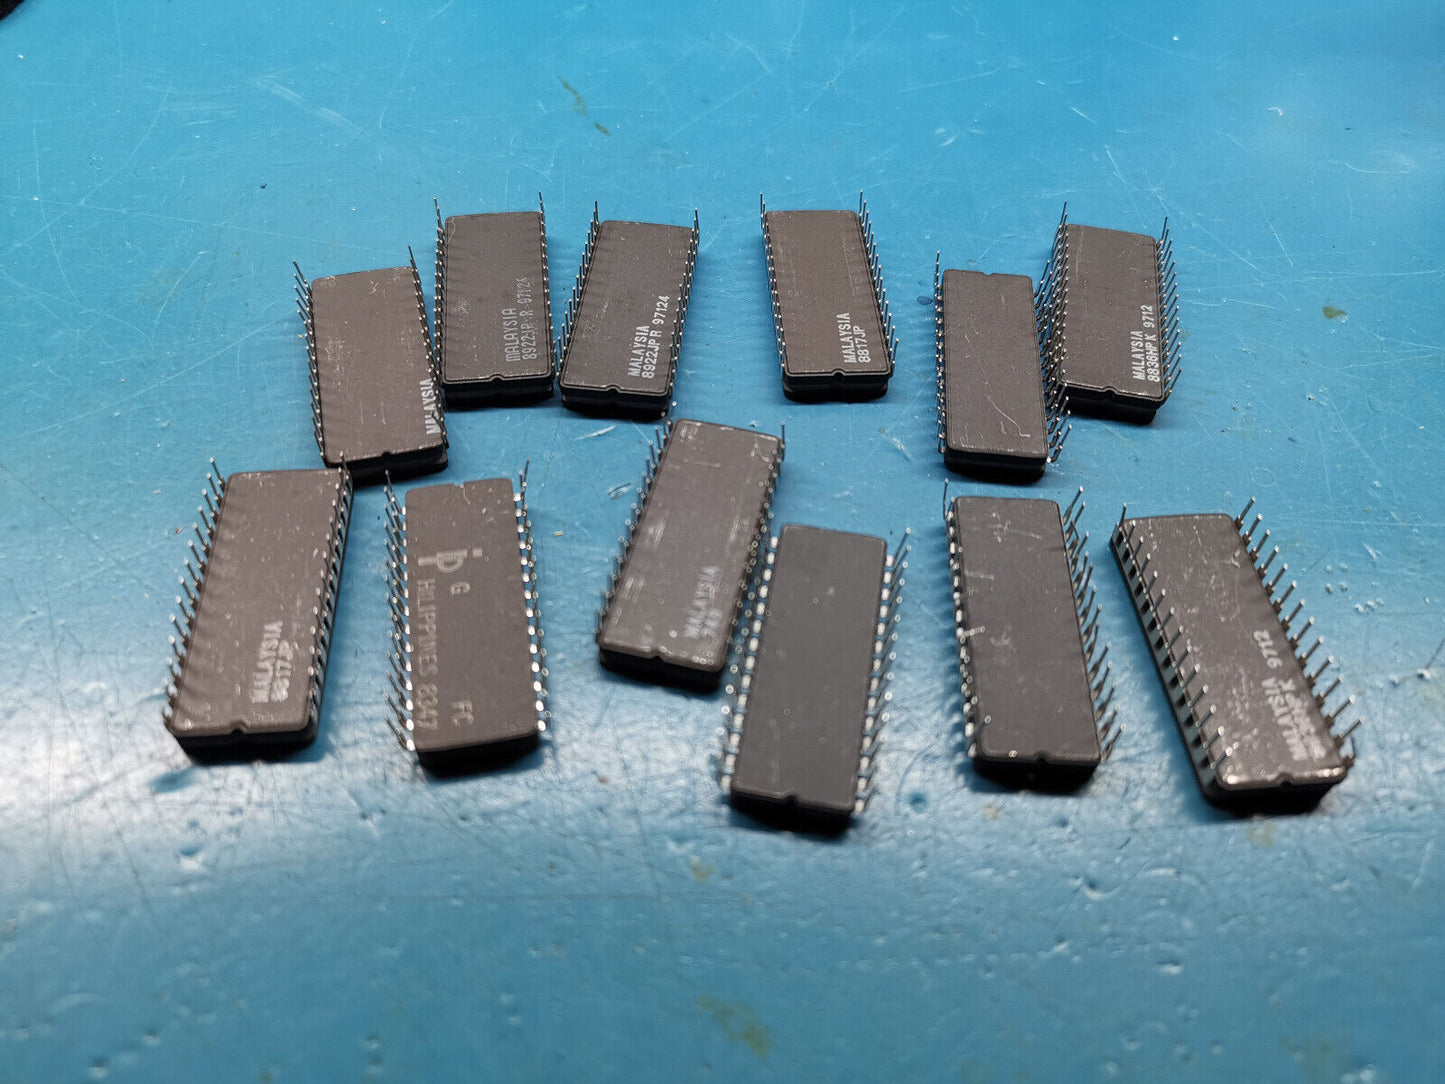 Joblot Of Various EPROM From Electronic Test Gear